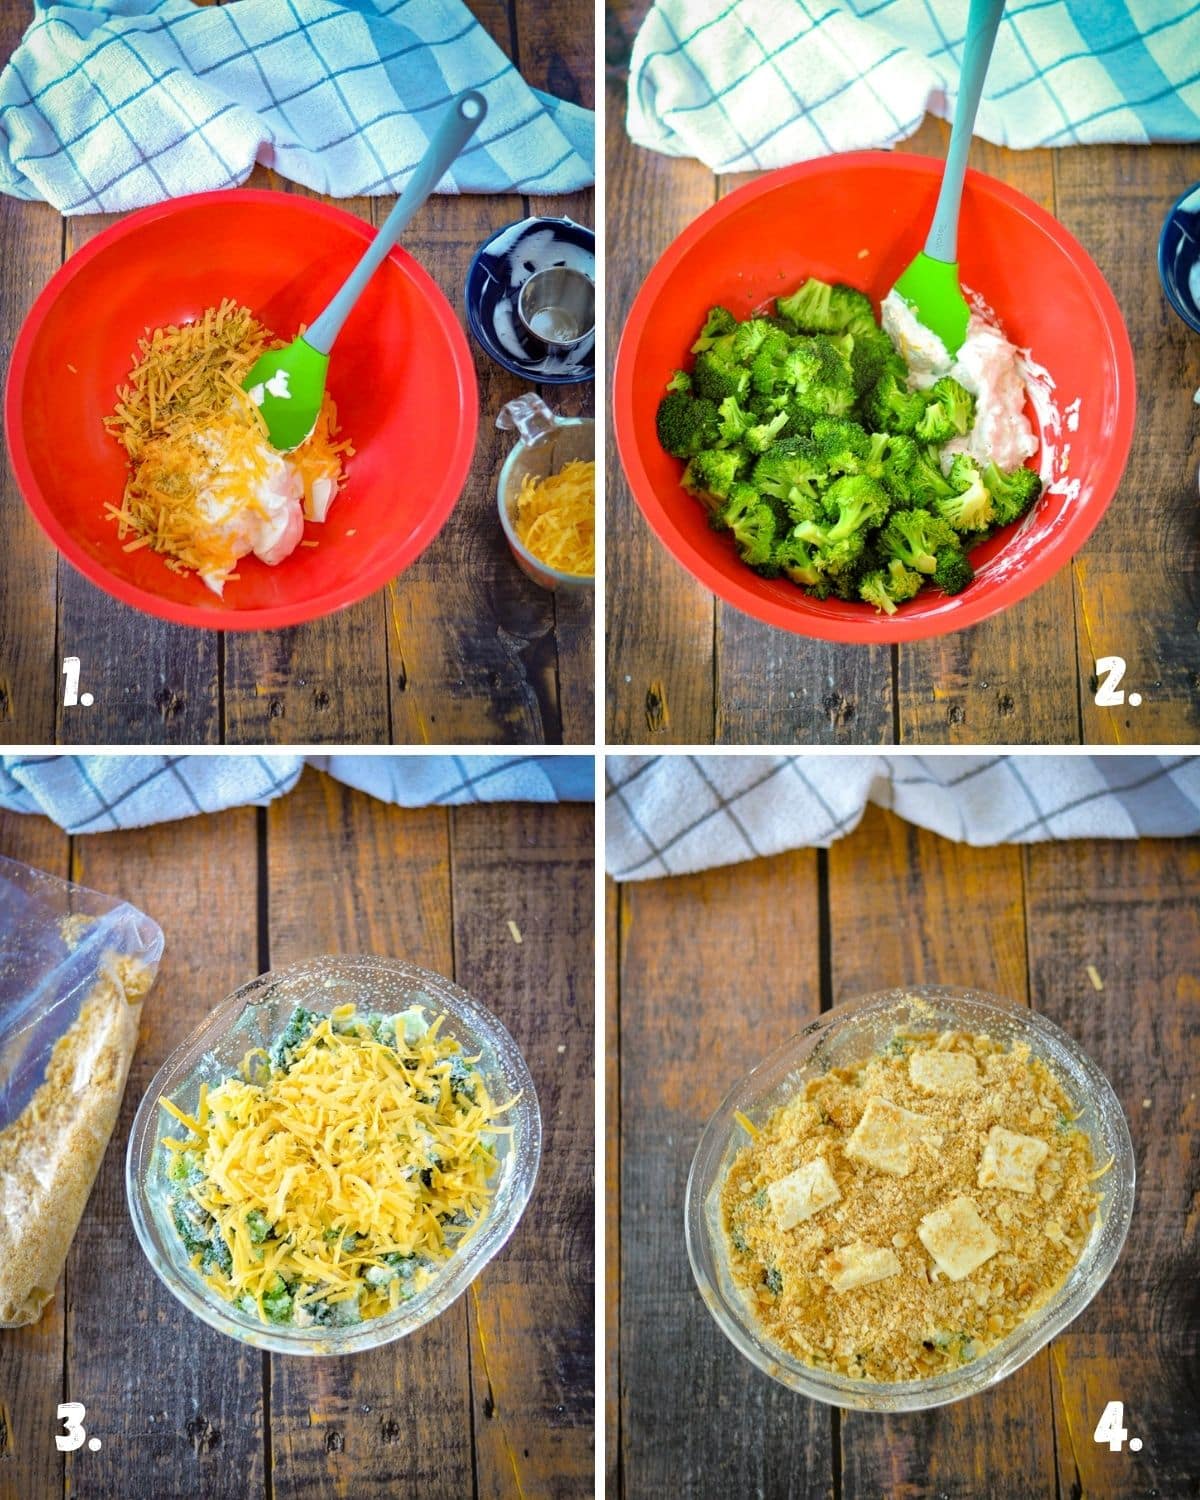 A 4 photo collage showing the process to make broccoli casserole. 